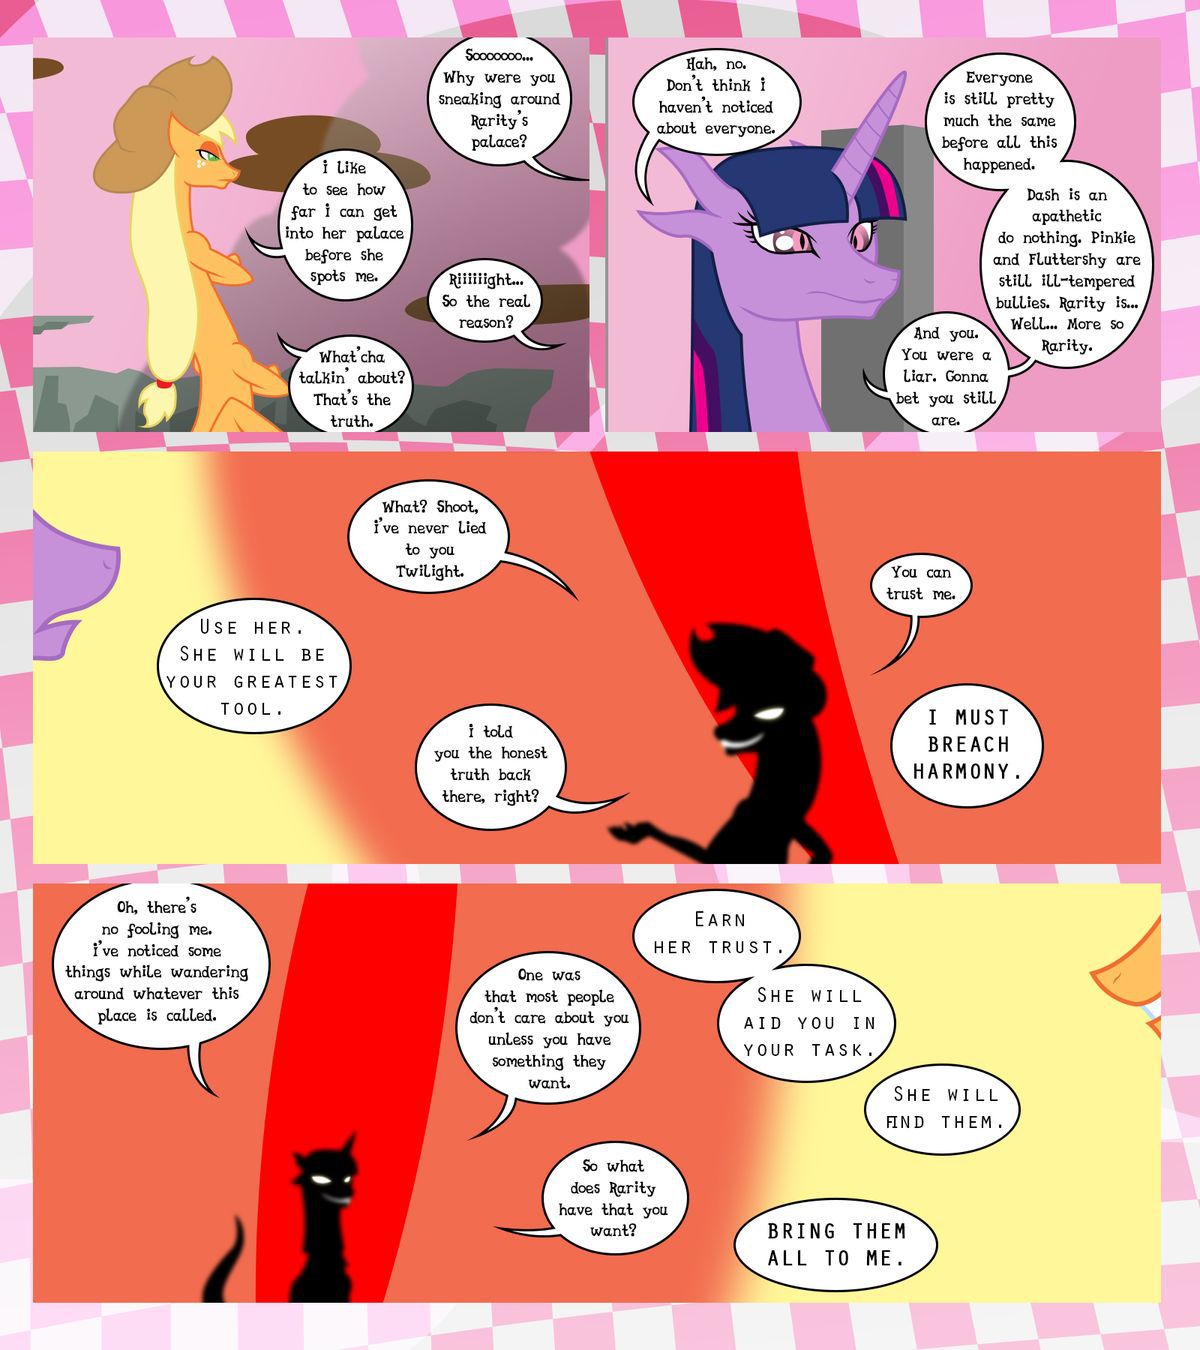 [GatesMcCloud] Cutie Mark Crusaders 10k: Chapter 3 - The Lost (My Little Pony: Friendship is Magic) [English] [Ongoing] 52